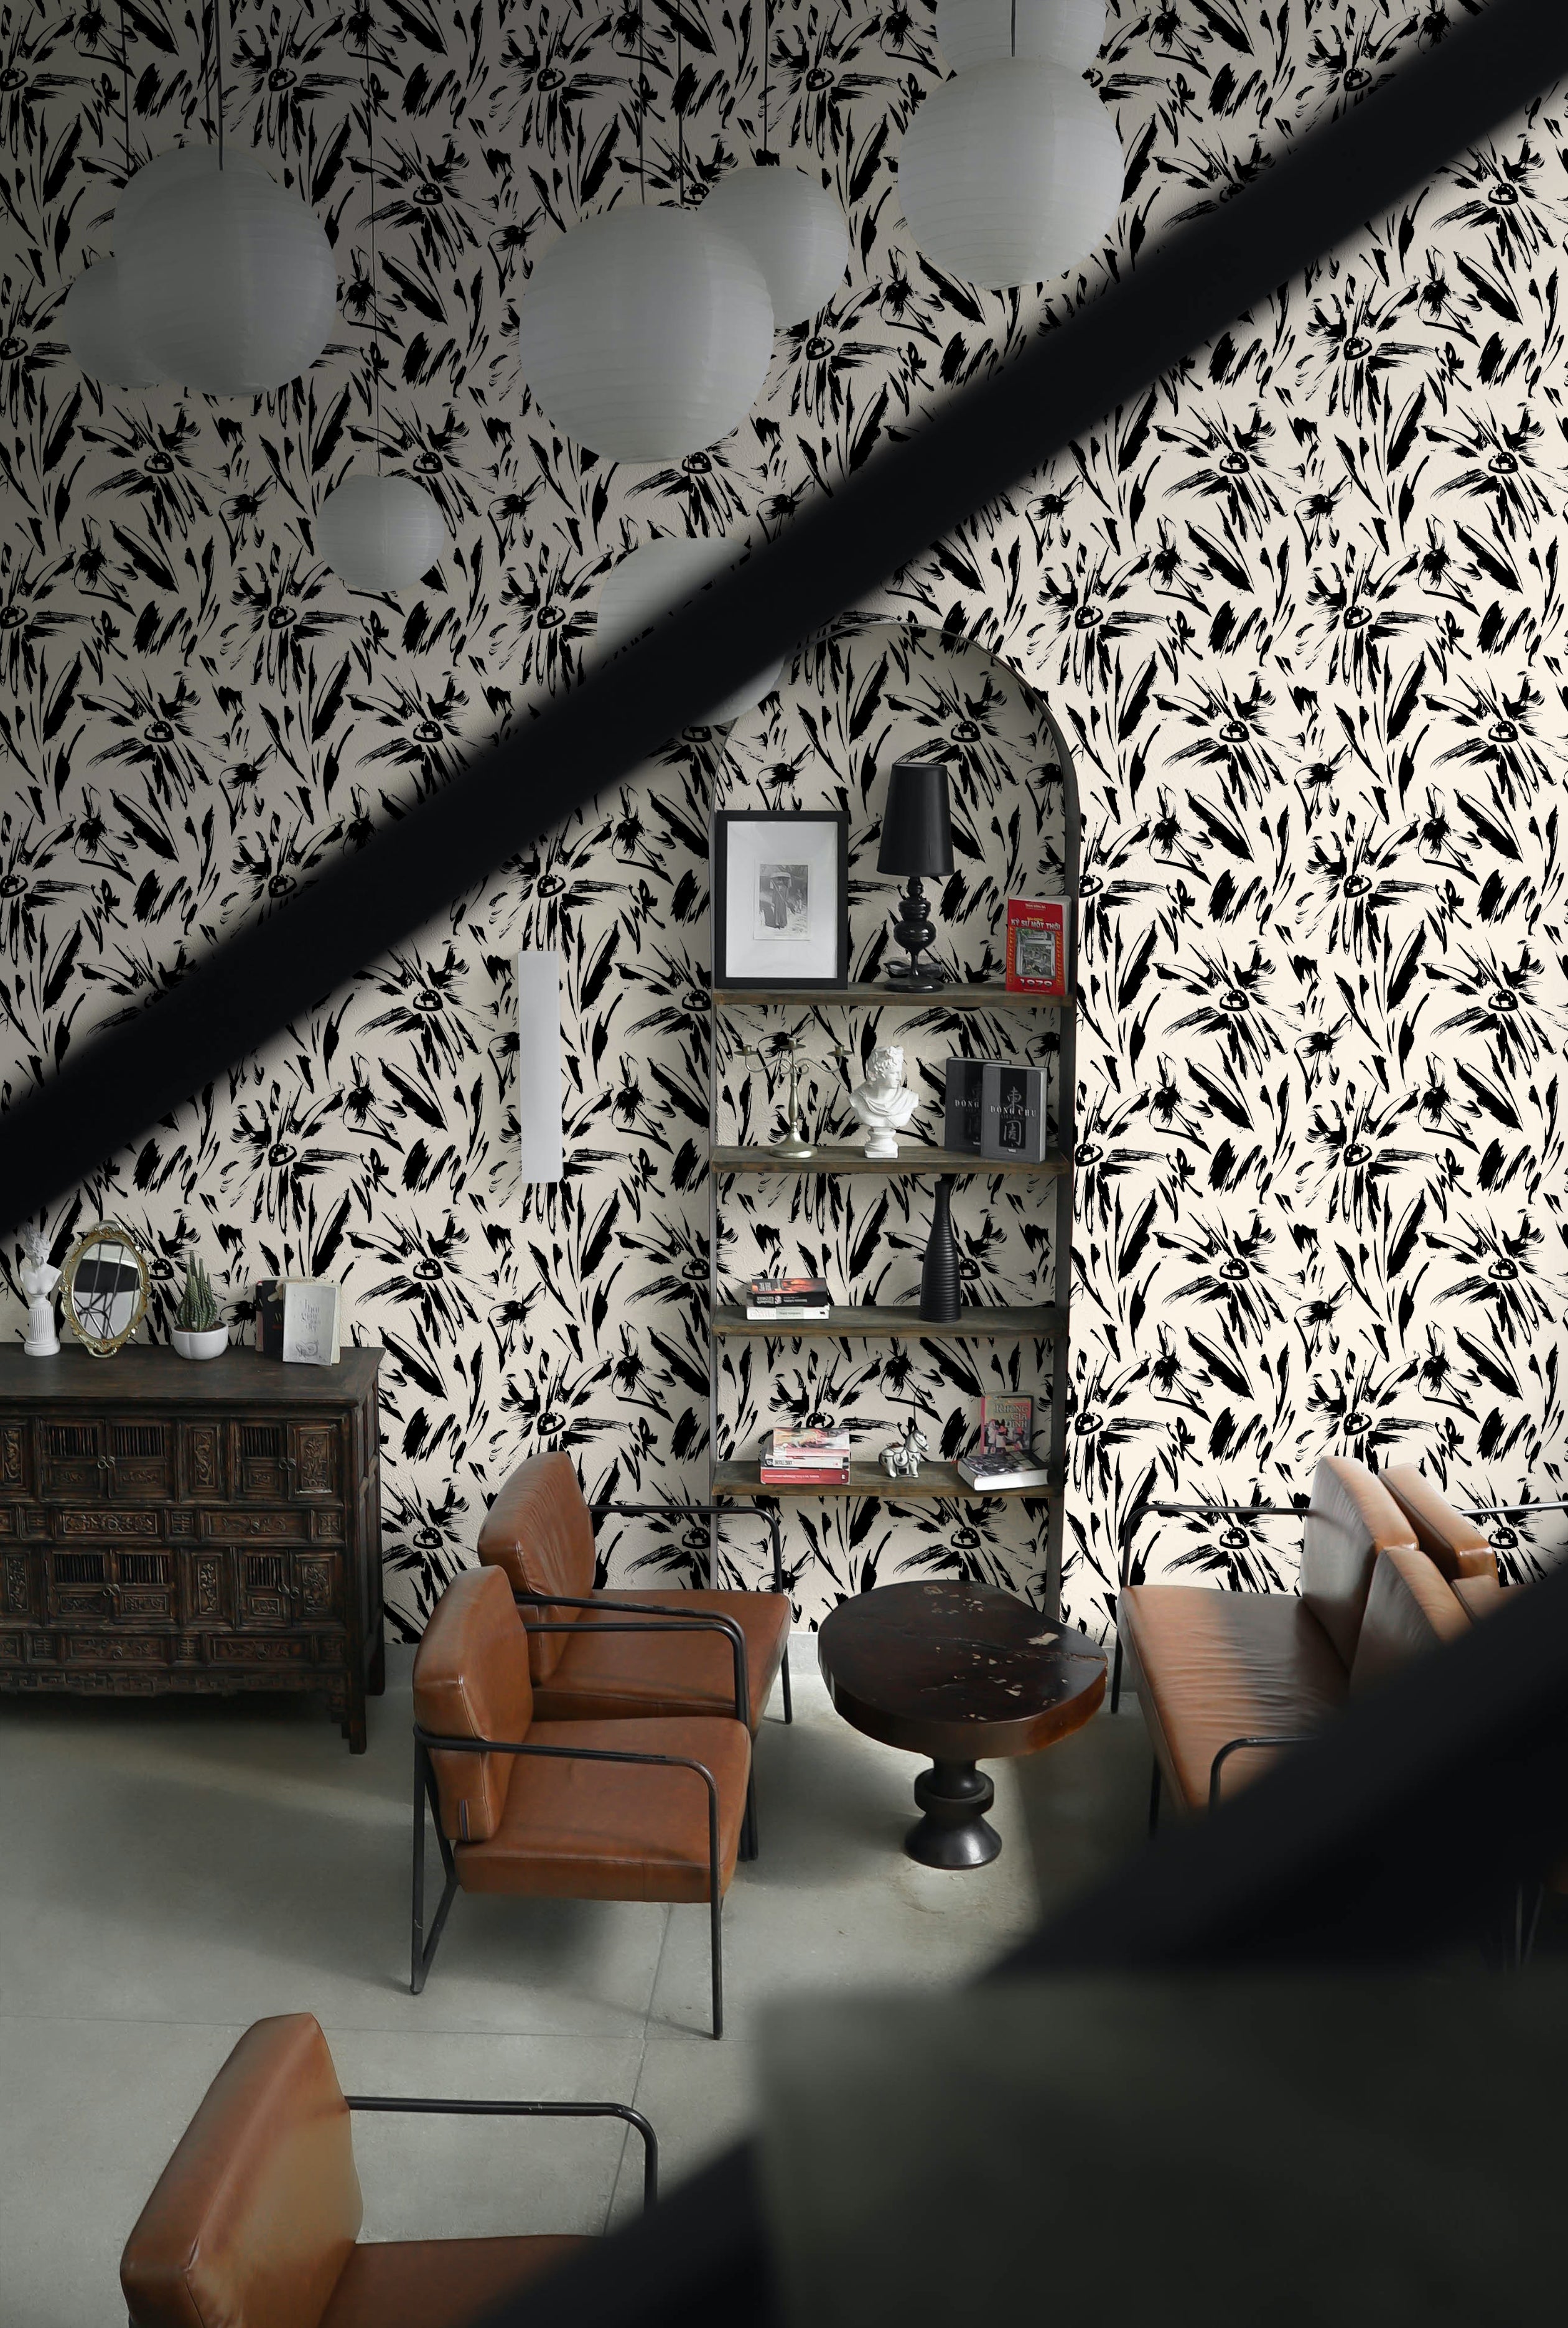 An elegant lounge area decorated with the Modern Floral Sketch Wallpaper - 25". The black on white abstract floral pattern provides a striking backdrop for the vintage brown leather furniture and eclectic decor, creating a sophisticated and contemporary space.